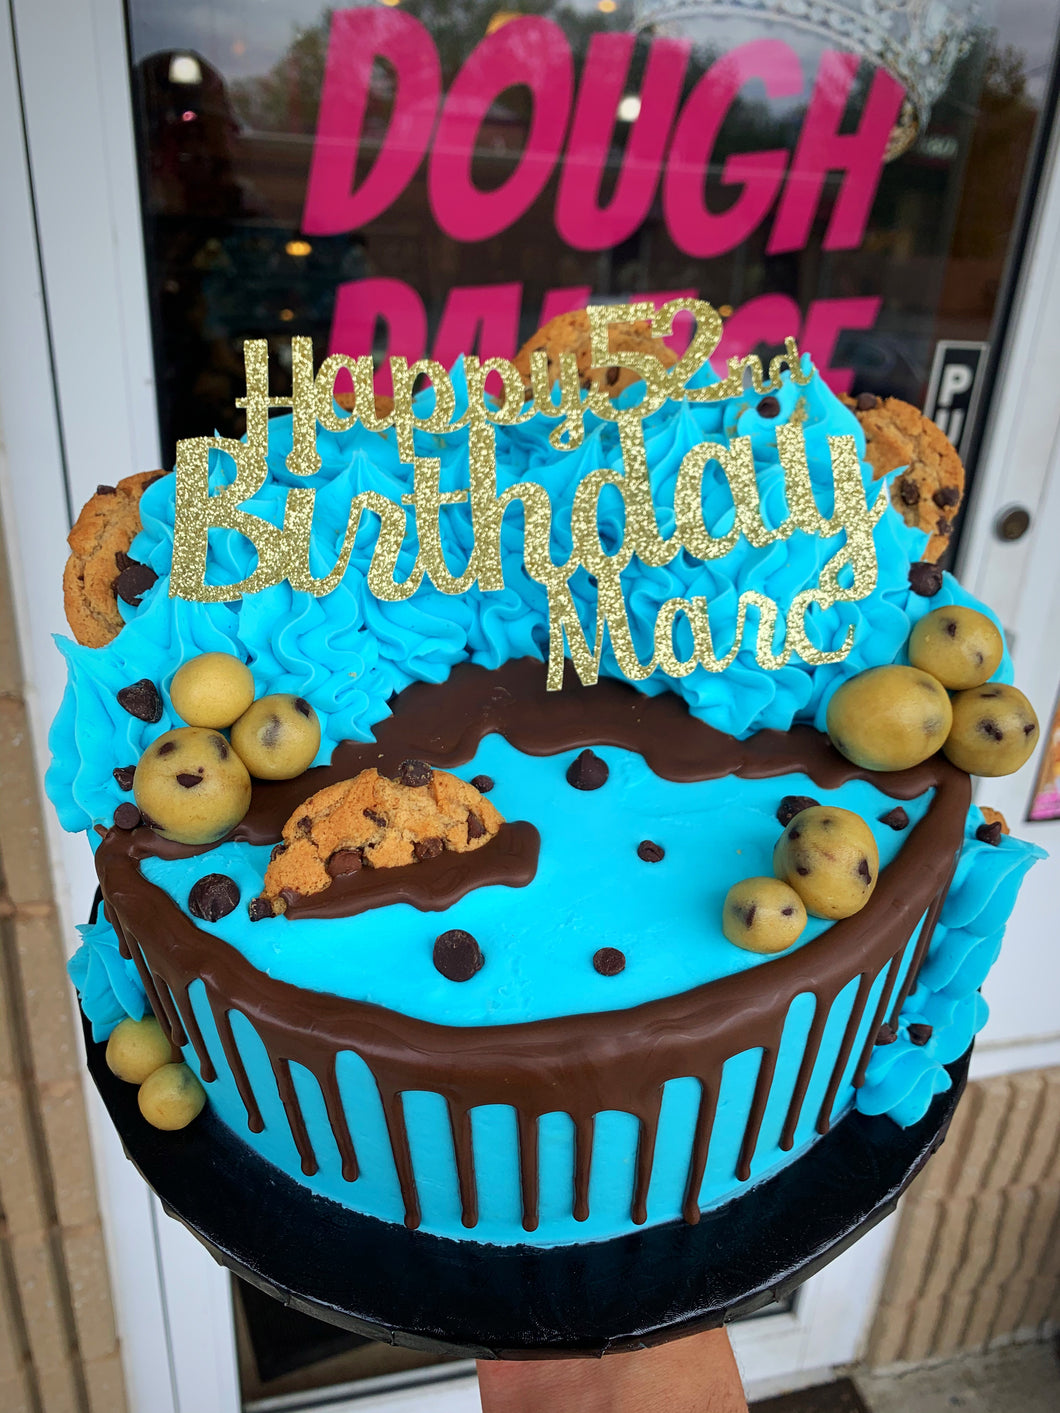 Cookie Monster Pro-Dough Cake